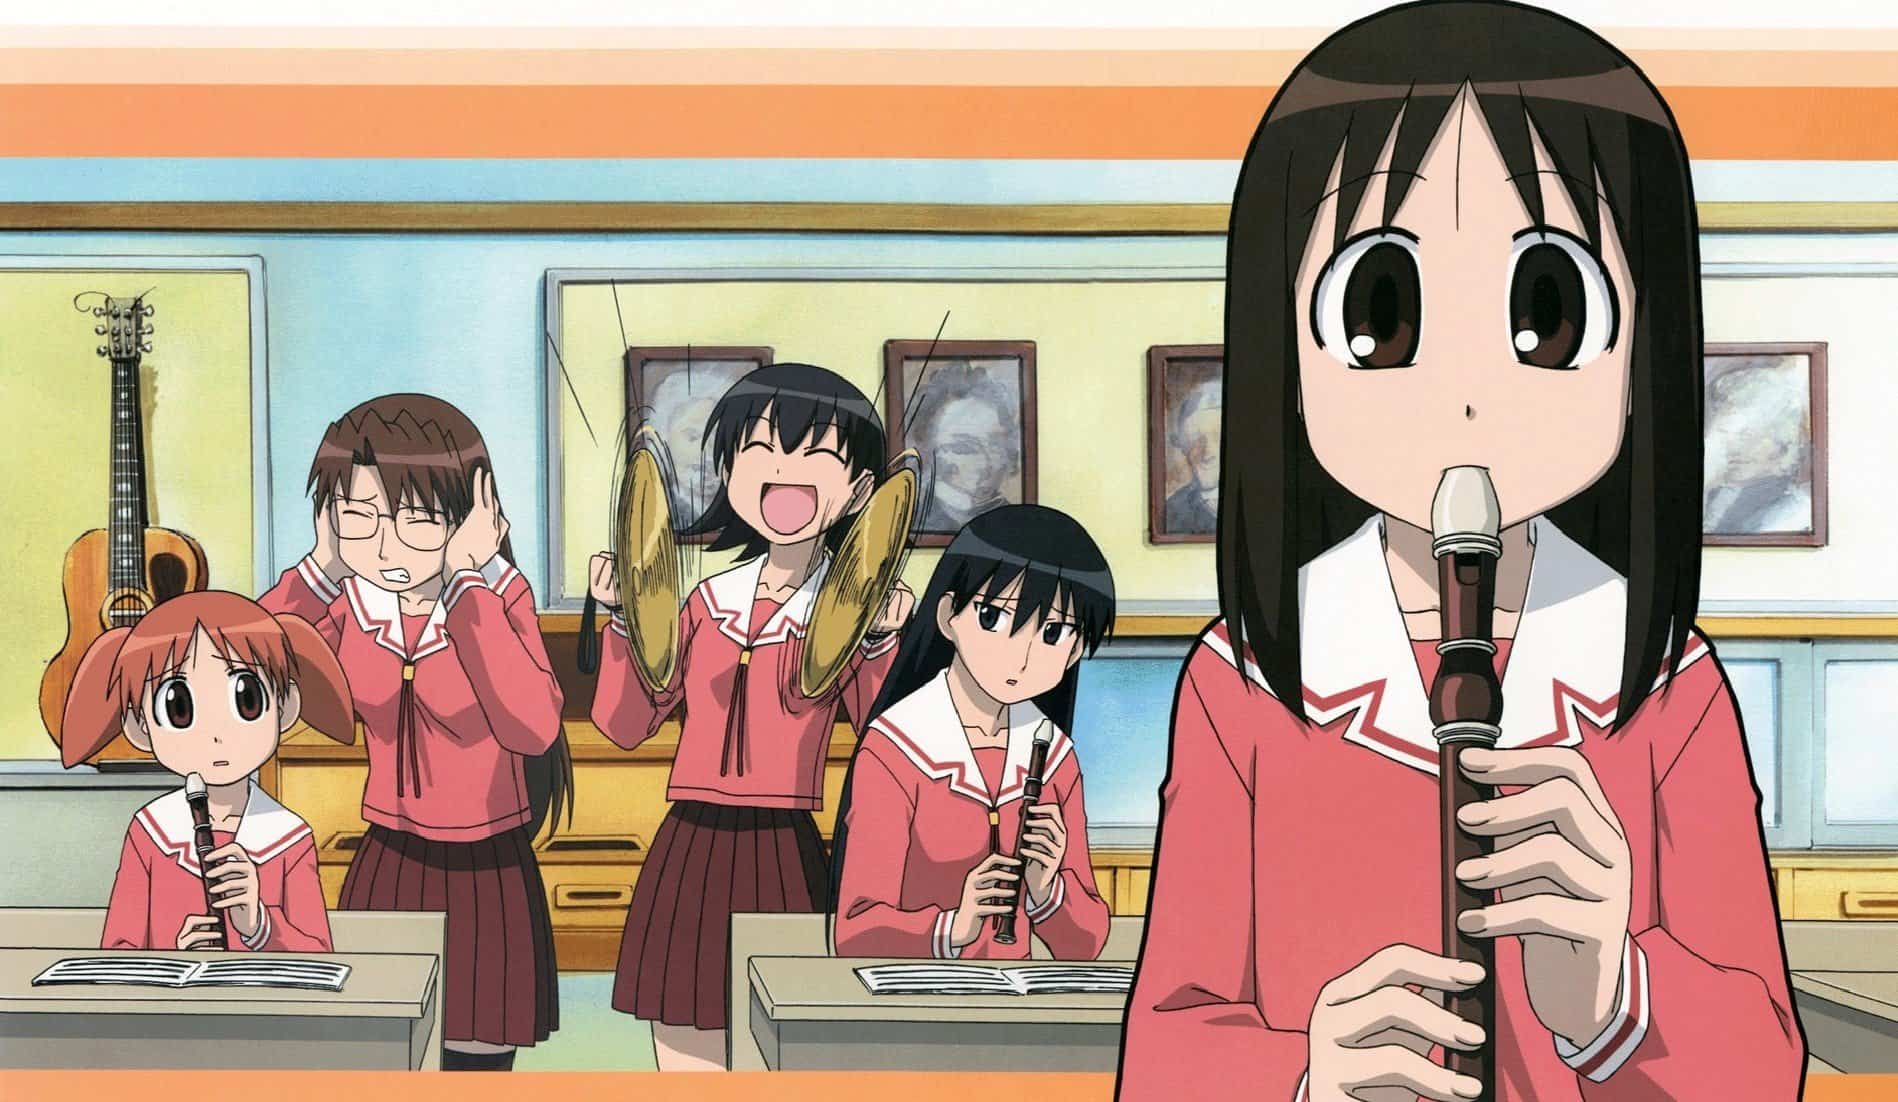 A poster showing the many characters from Azumanga Daioh, with Osaka playing the recorder in the front.